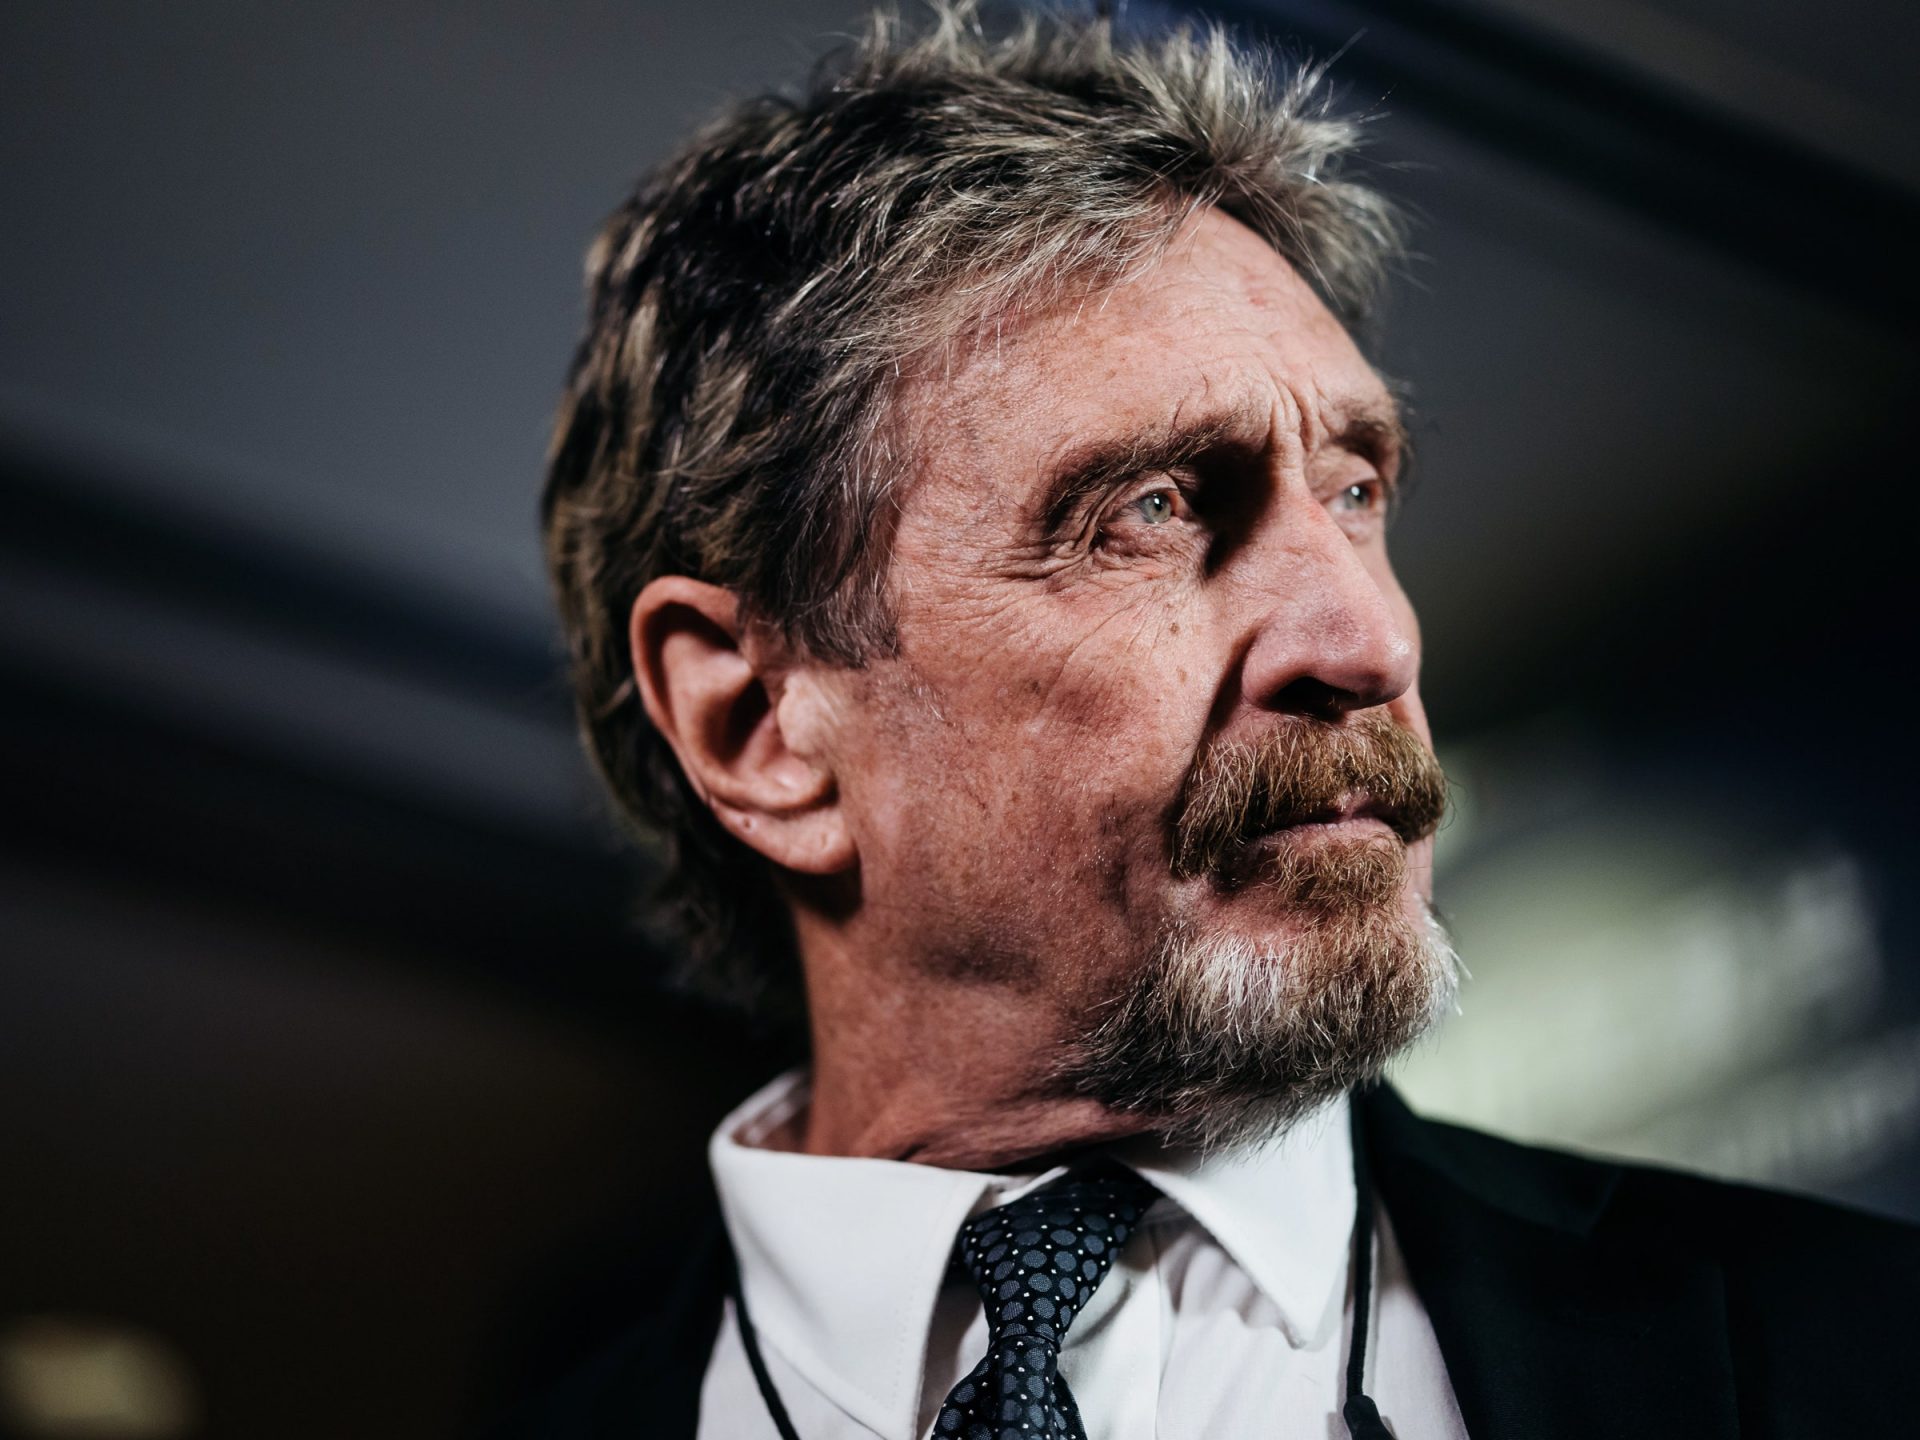 John McAfee Dies in Spanish Penal advanced After Extradition Scream